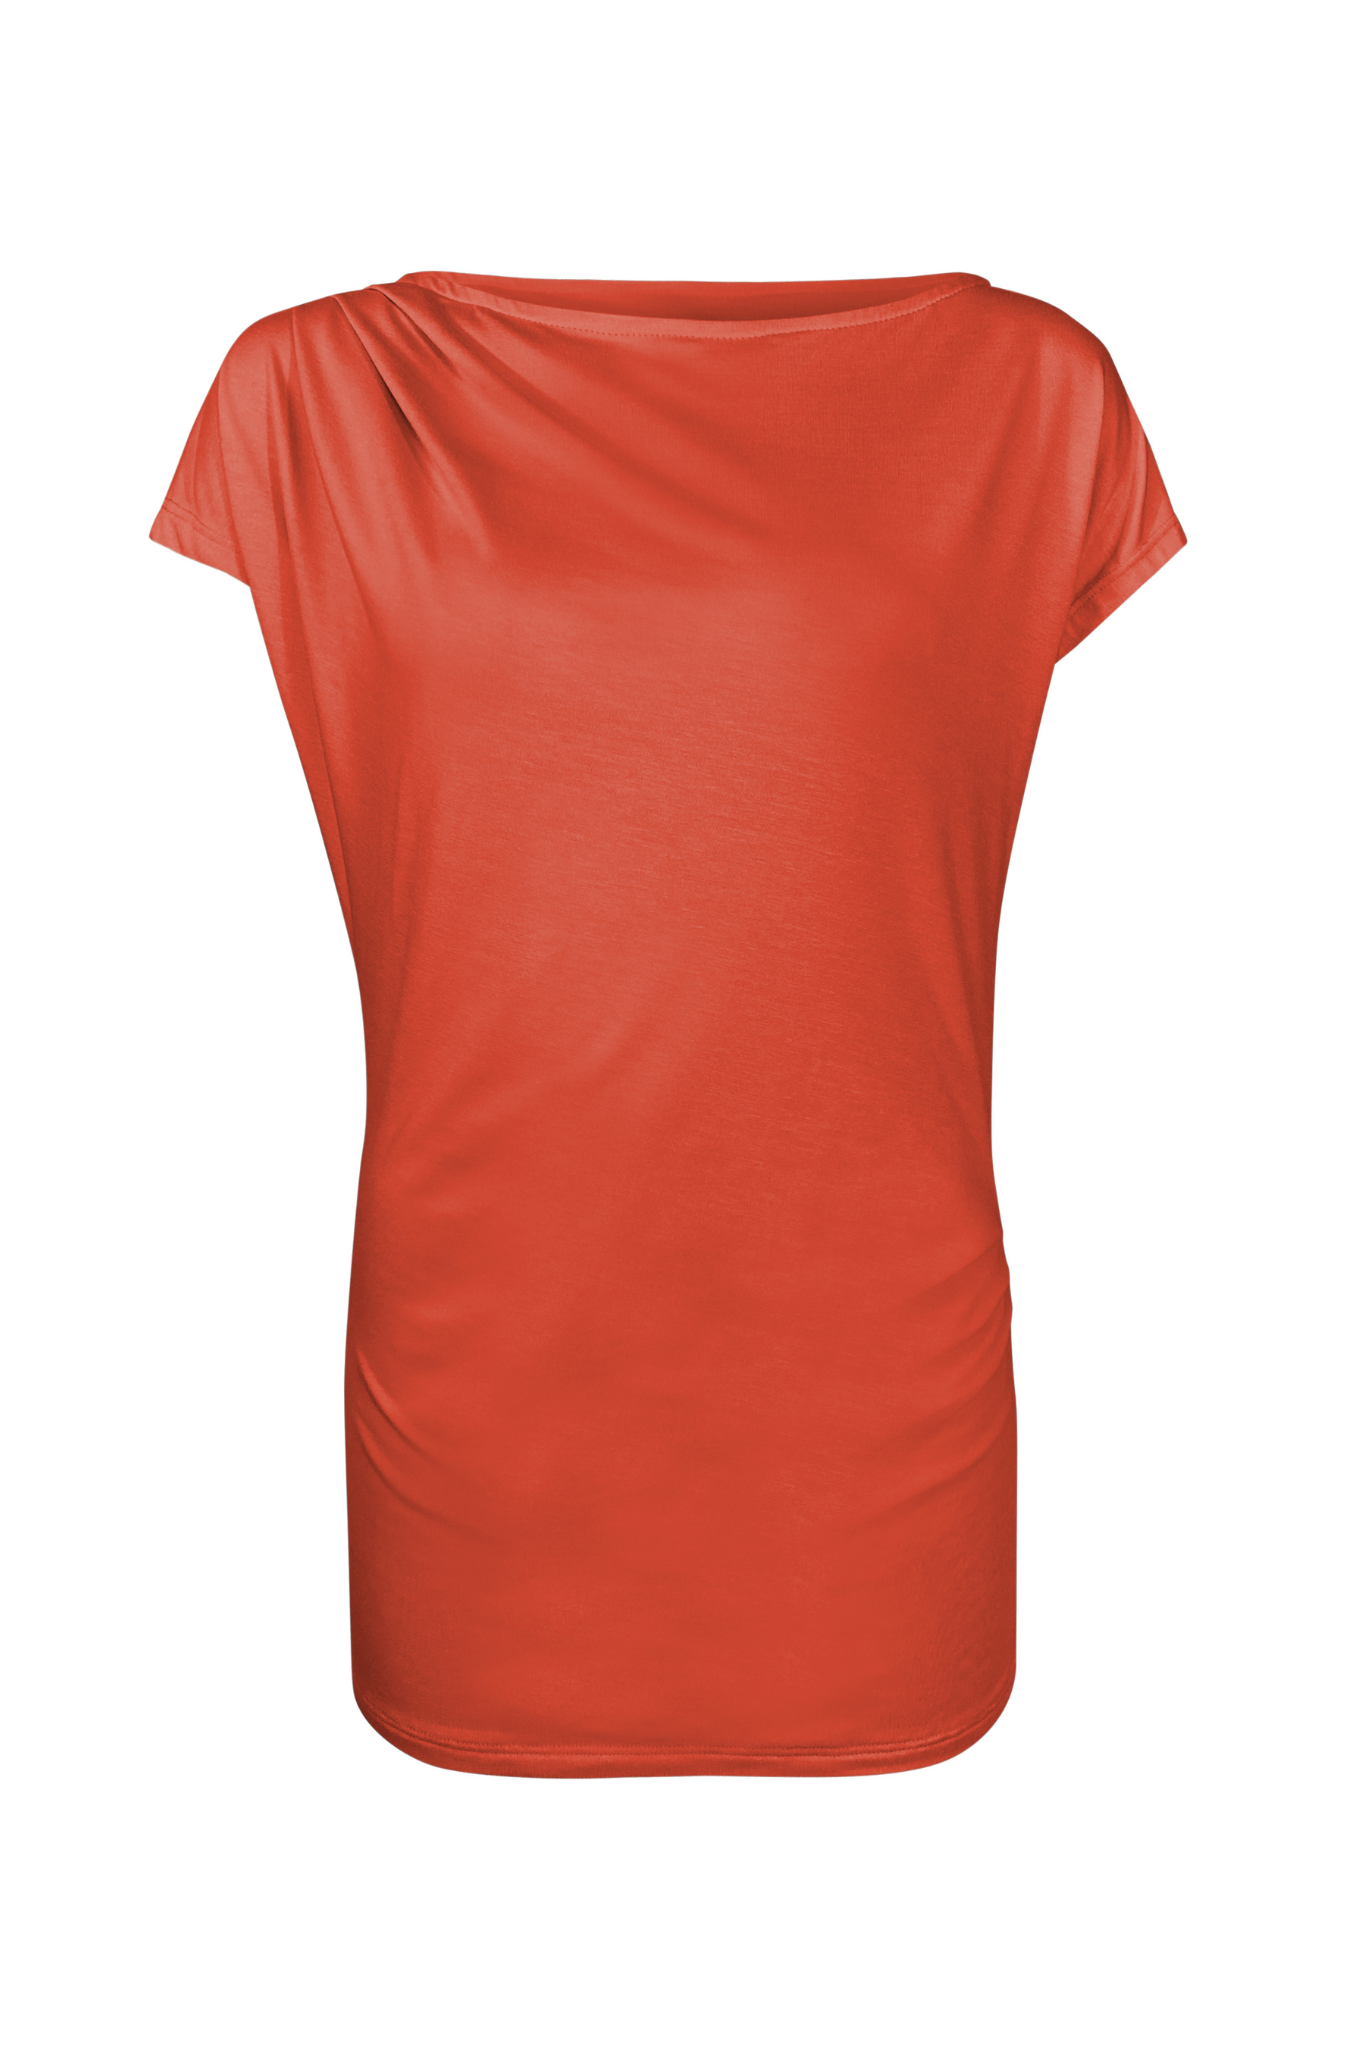 Gentianne Top by Melow, Coral, pleats at shoulder and hip, short extended sleeves, hem can be pulled up or down, eco-fabric, bamboo-rayon, OEKO-TEX certified, sizes XS to L, made in Montreal